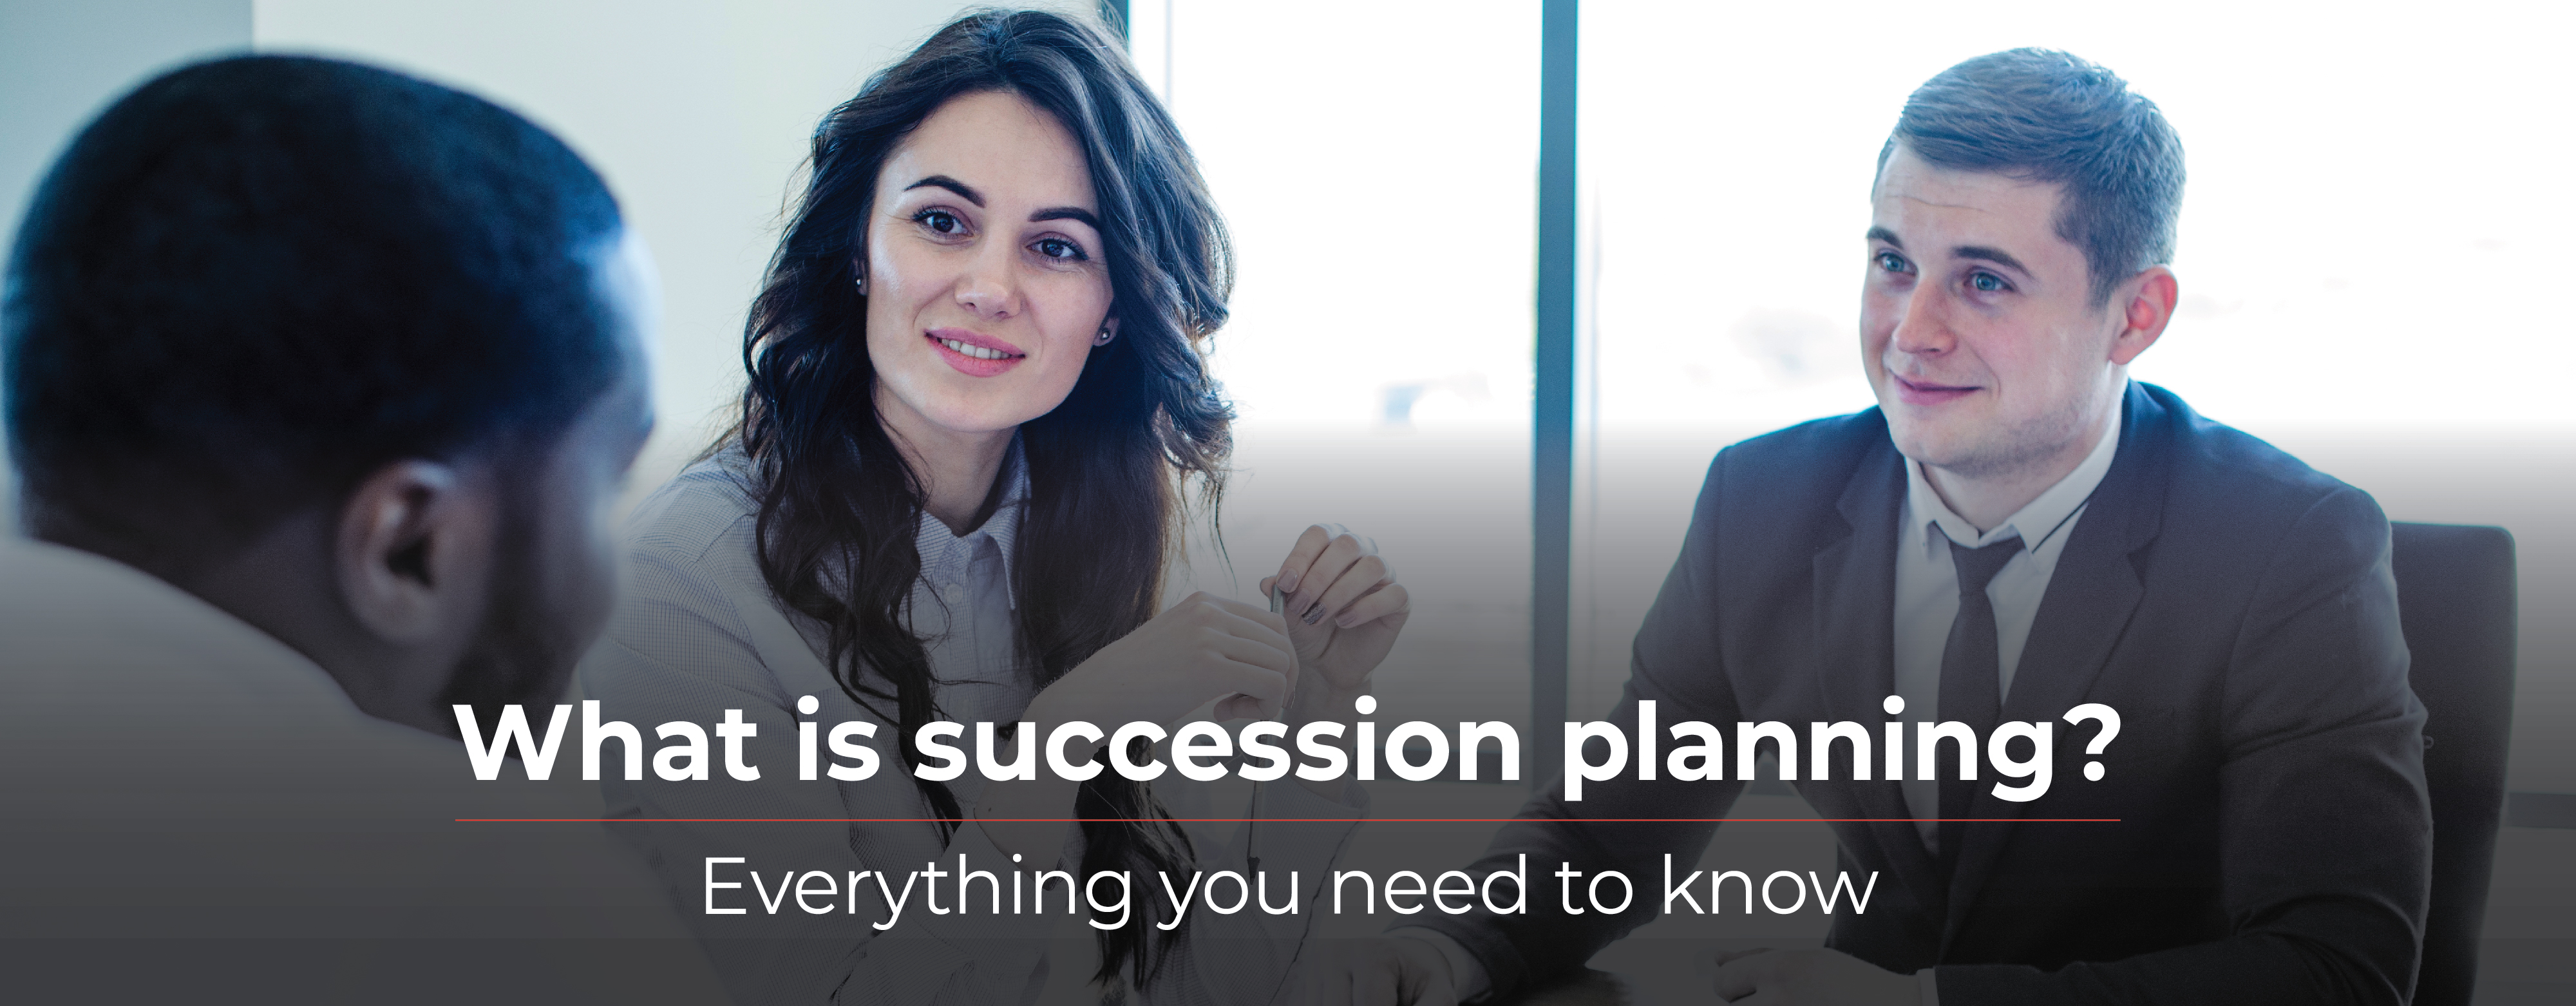 What is succession planning? Everything you need to know